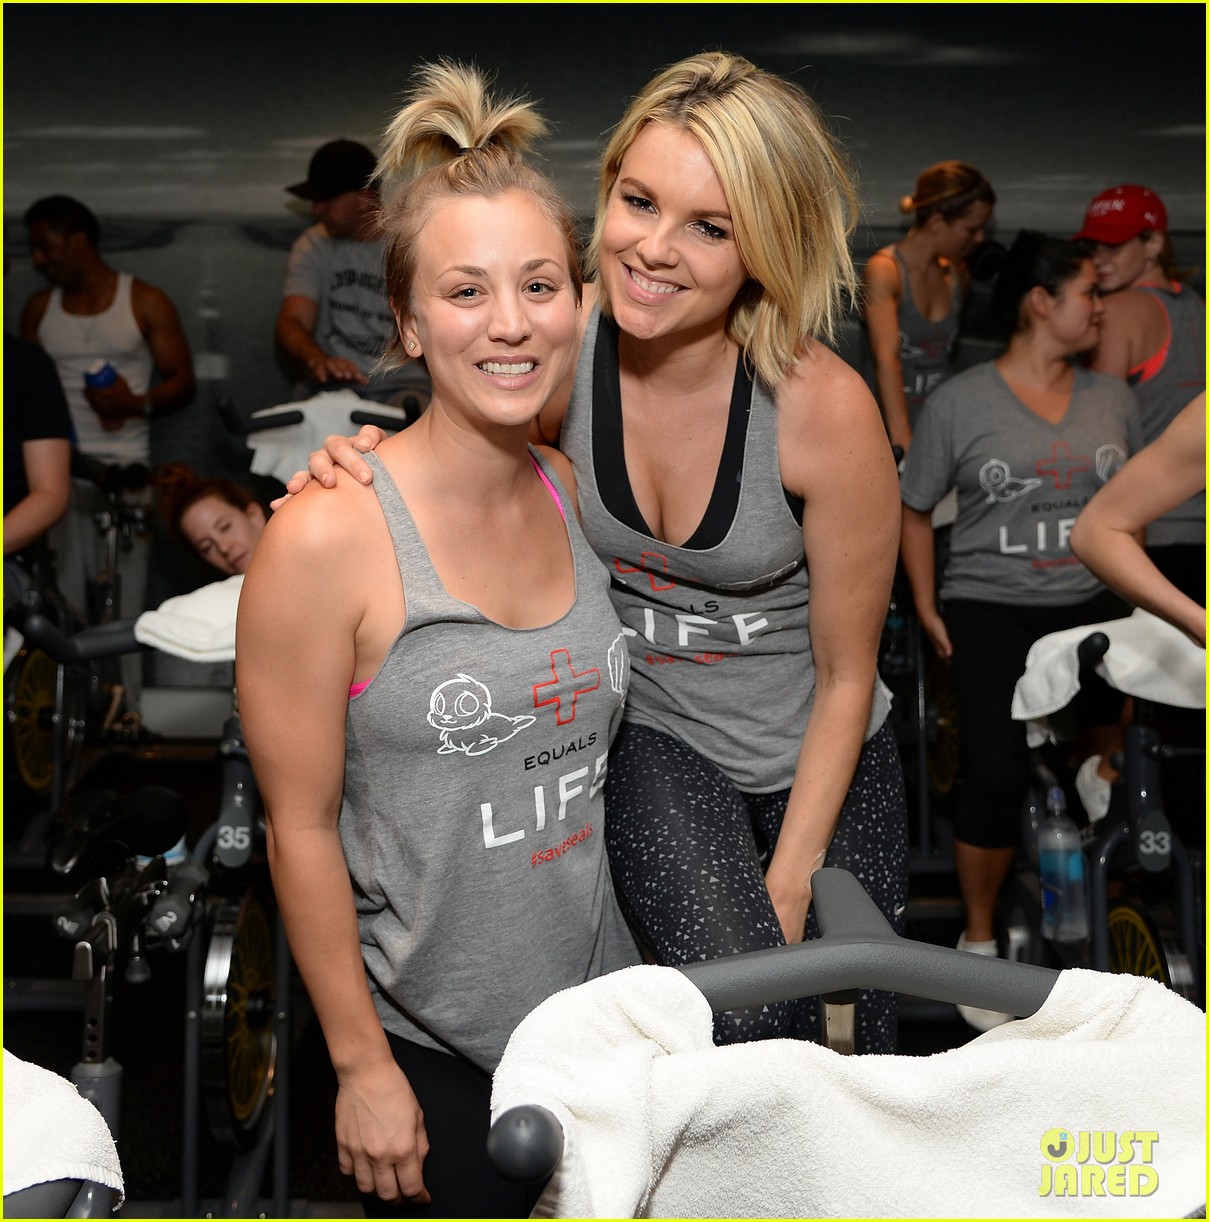 Avid Animal Lover Kaley Cuoco Uses Her So Called Fame To End Seal Hunting Photo 3143208 Ali Fedotowsky Kaley Cuoco Ryan Sweeting Pictures Just Jared Best known for her role as bridget hennessy on the abc sitcom 8 simple rules and penny hofstadter on the cbs sitcom the big bang theory. 2